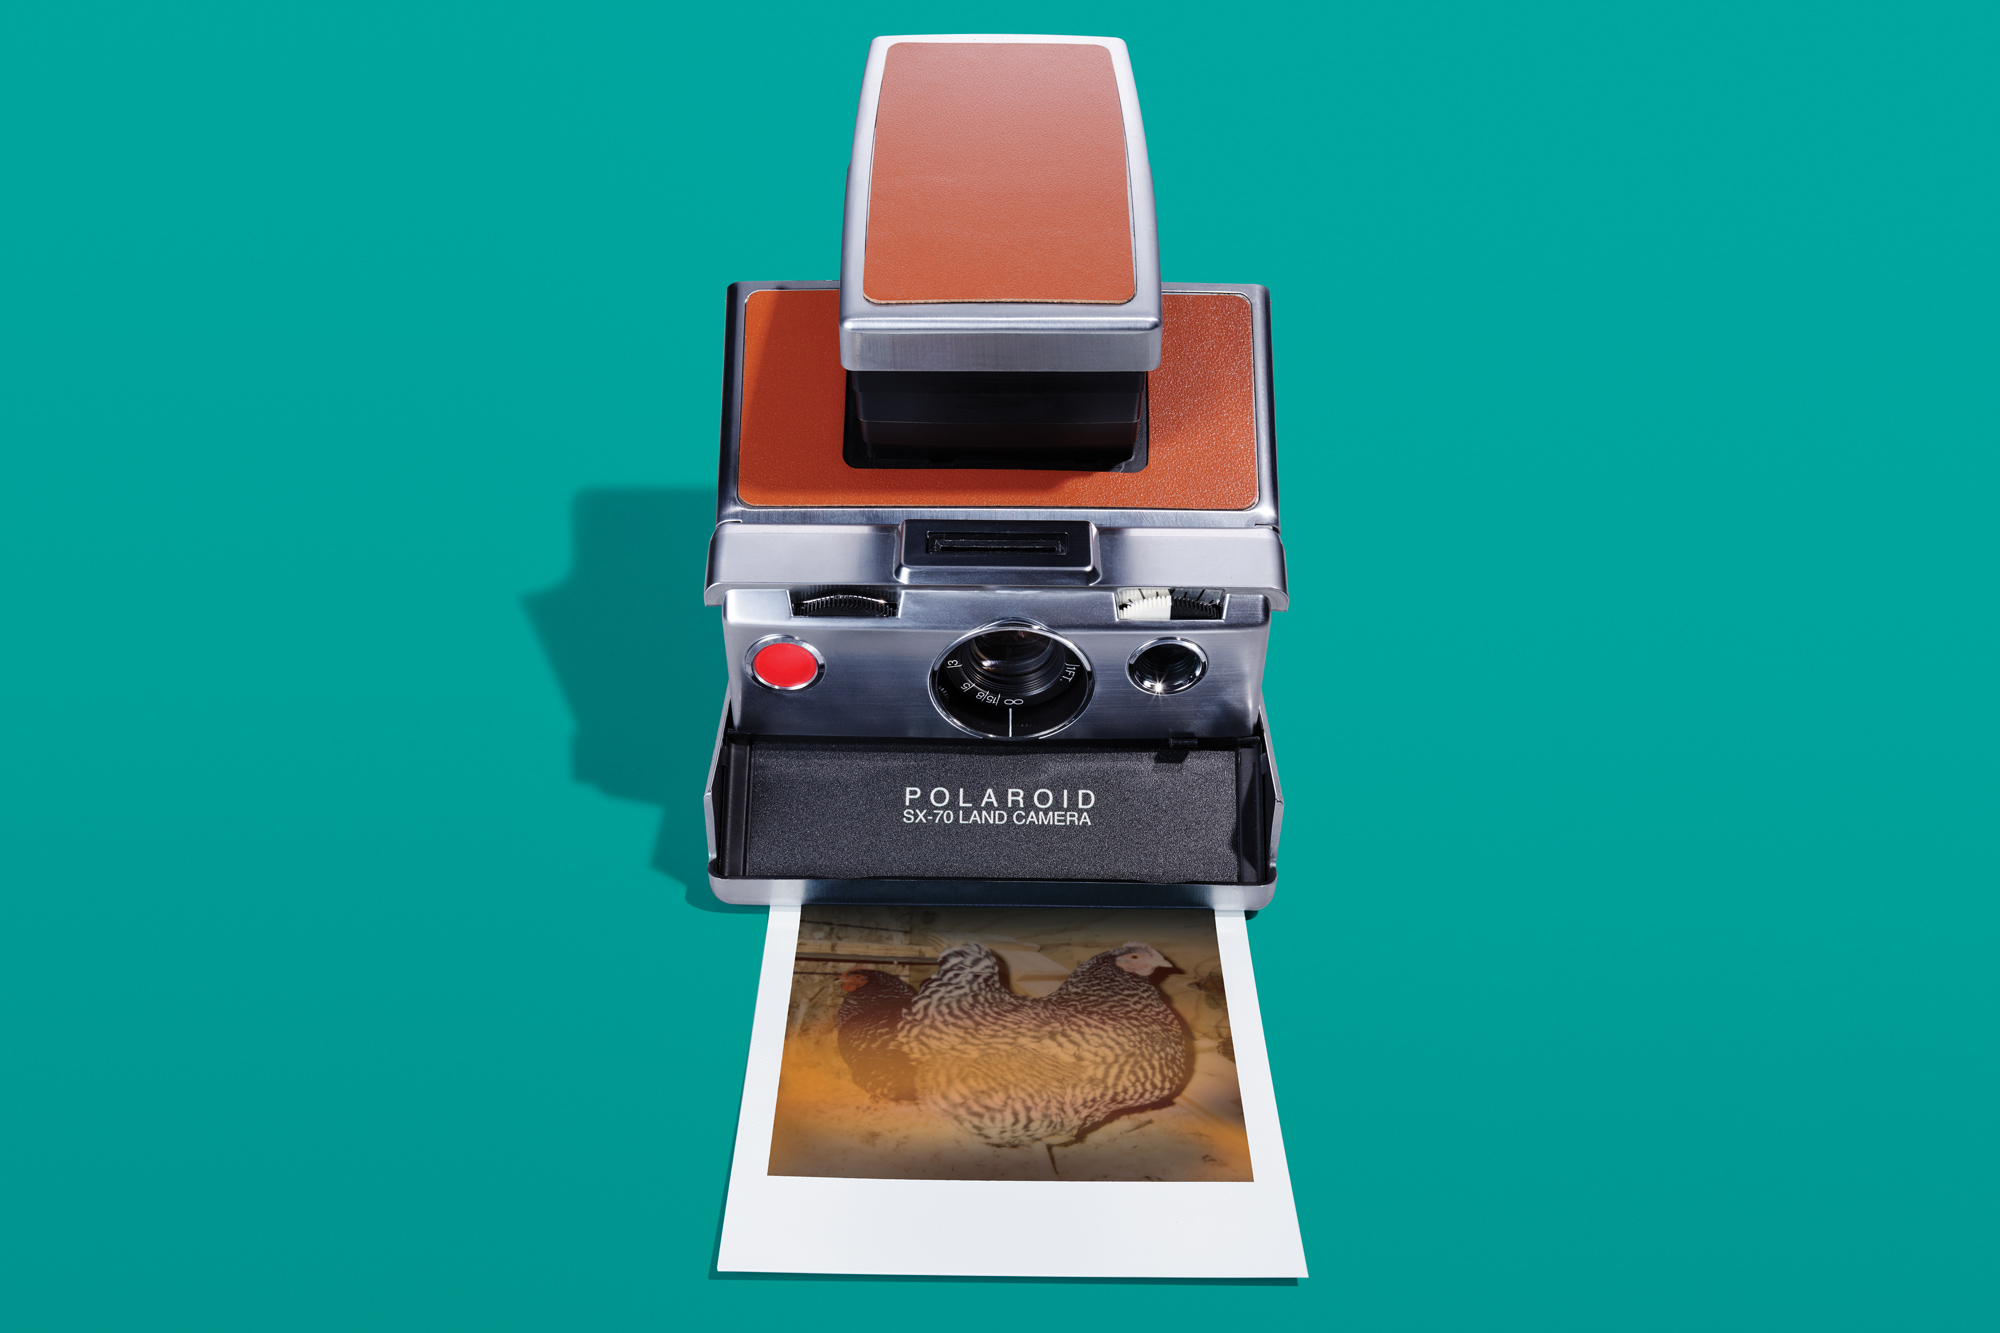 Polaroid photos still work on old-school chemicals and engineering